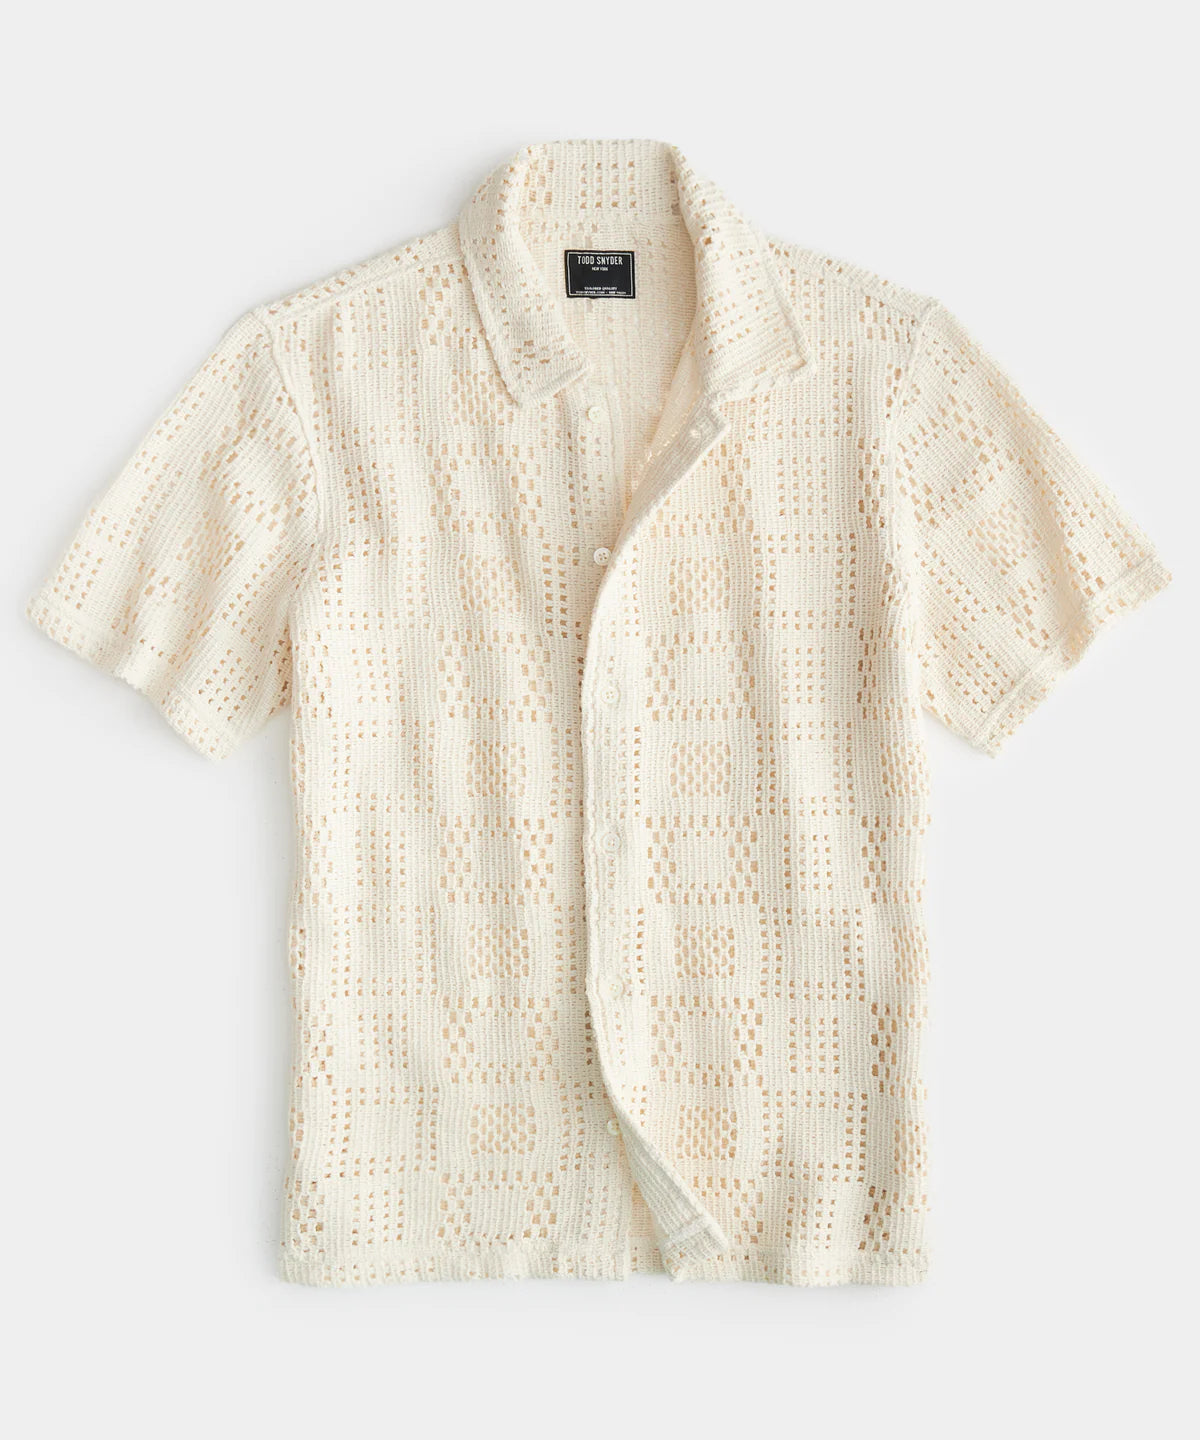 Todd Snyder - TODD SNYDER OPEN-KNIT CABANA POLO IN BISQUE TONAL SQUARE - Rent With Thred